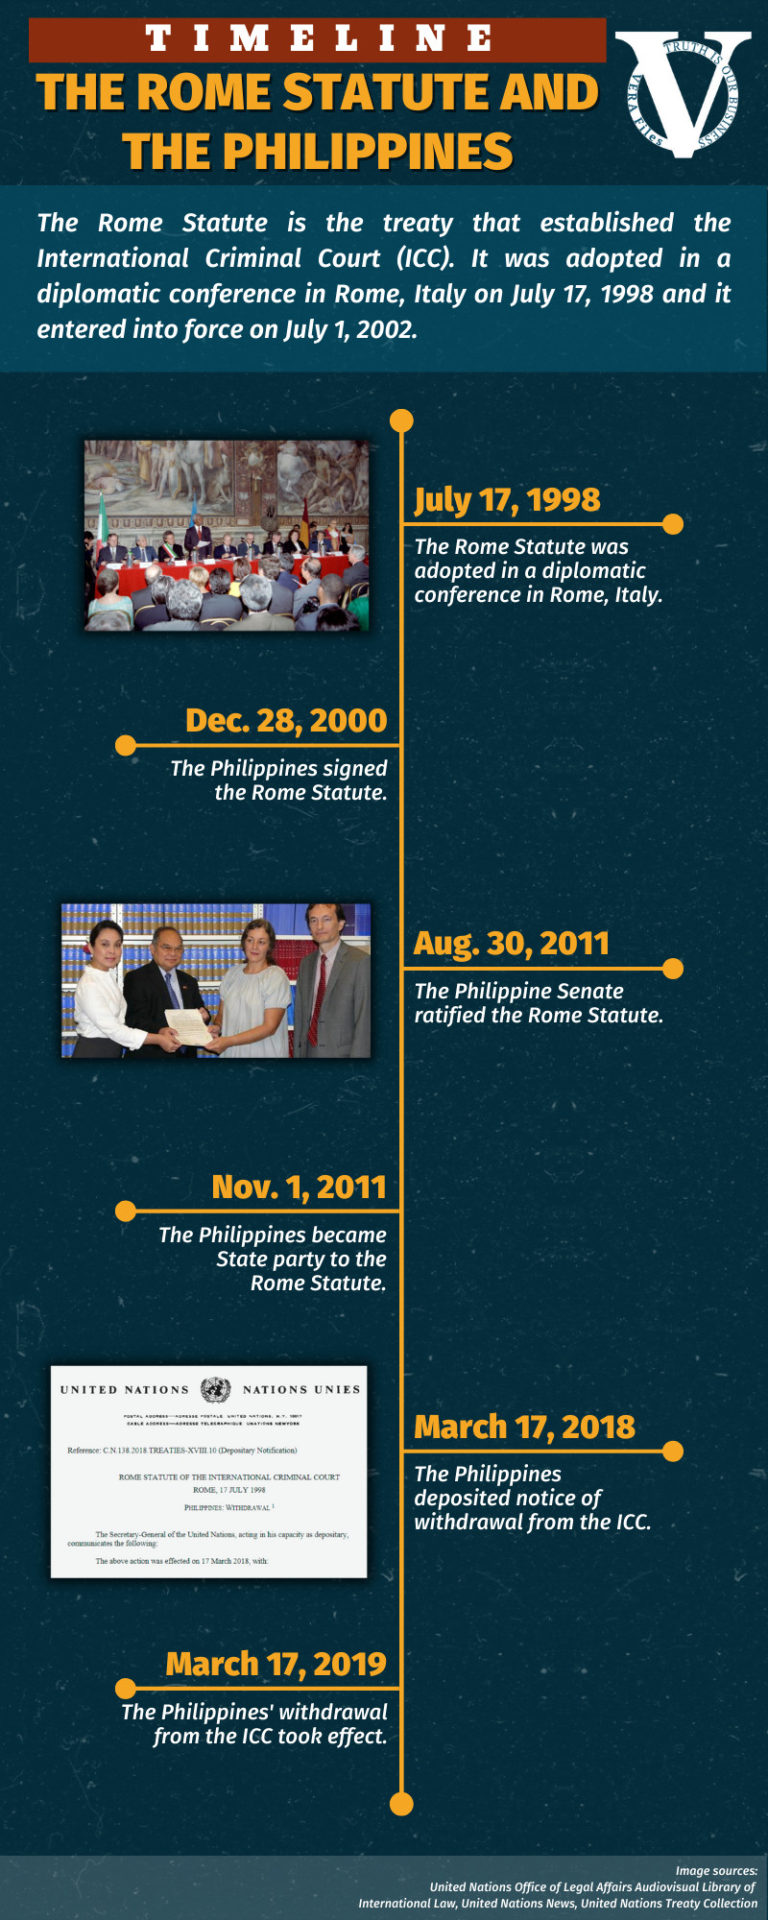 TIMELINE: The Rome Statute and the Philippines